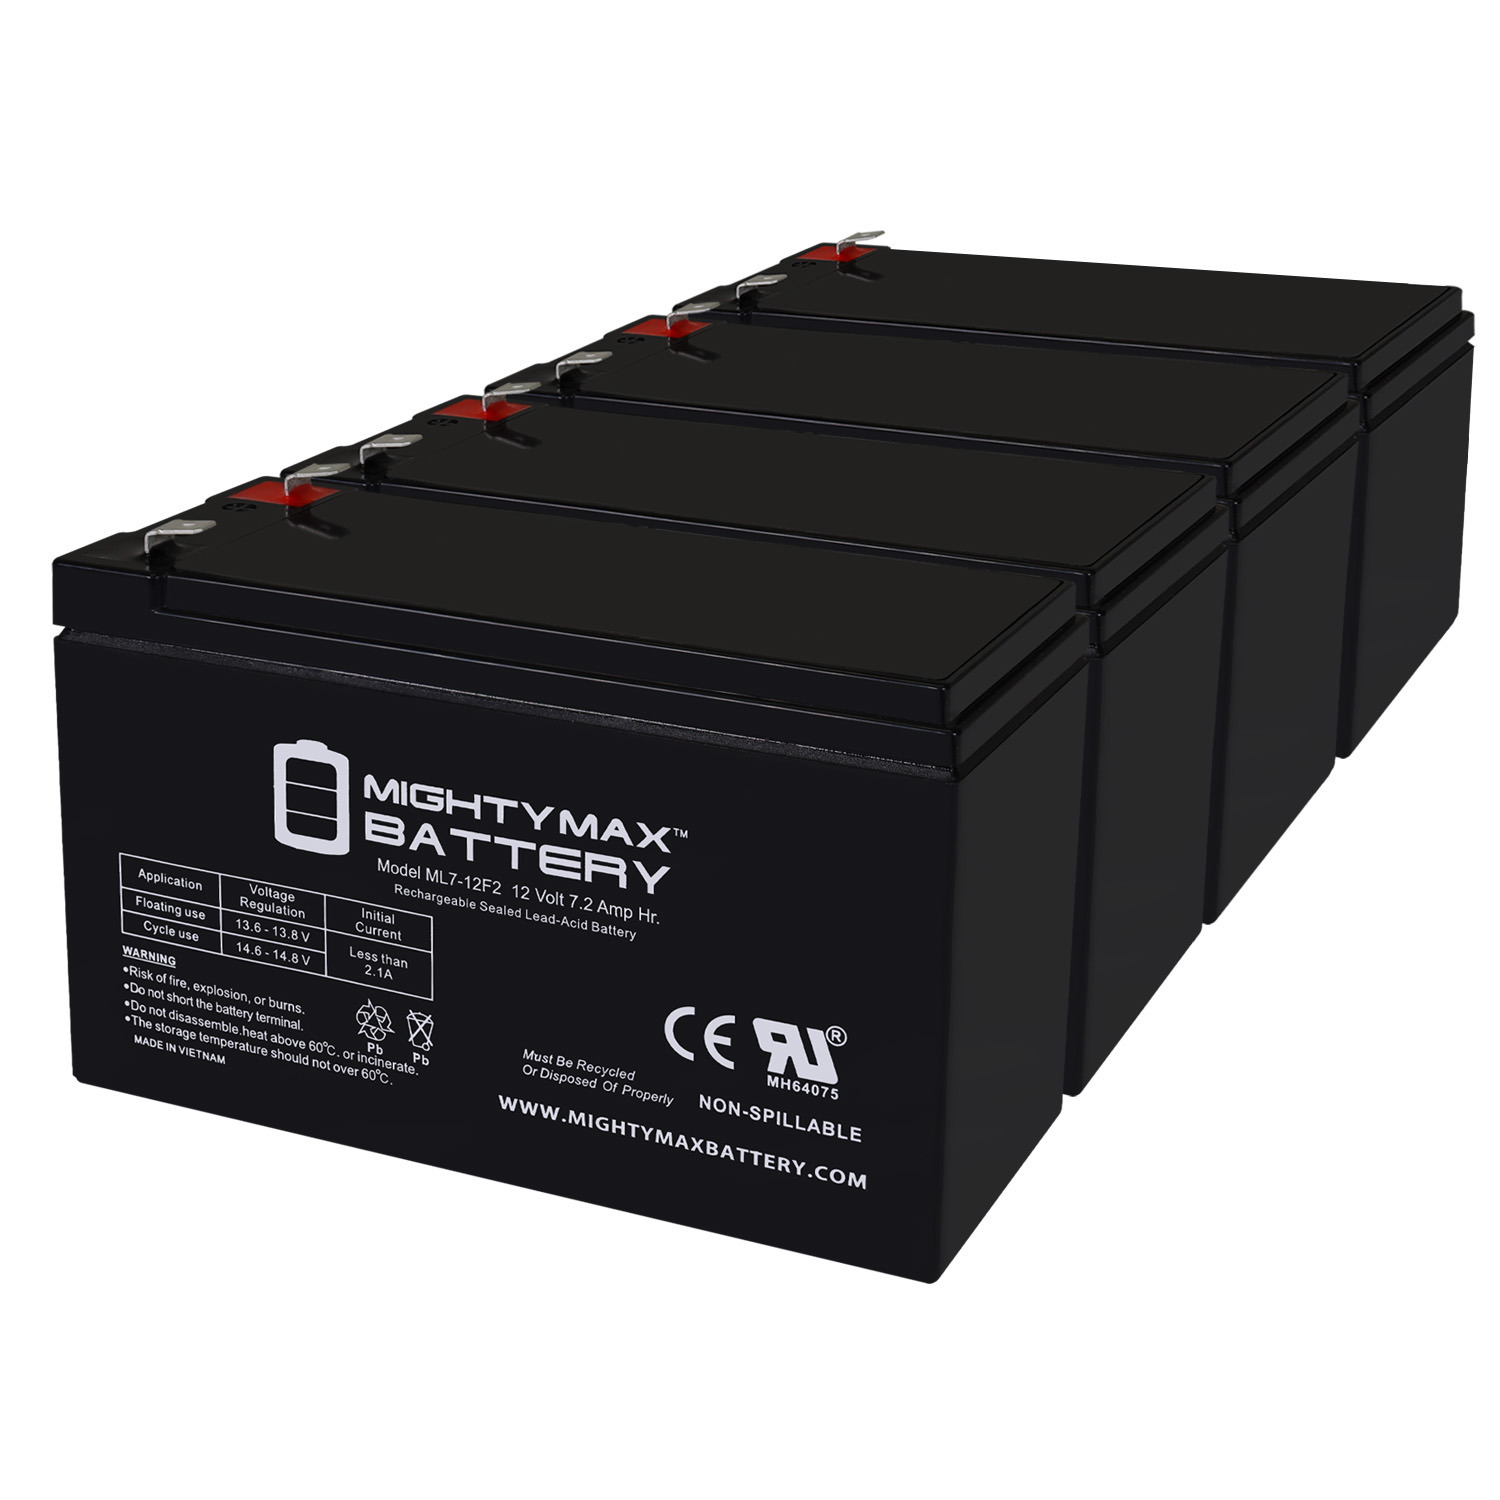 12V 7Ah F2 Replacement Battery for Unisys PW9120 one BAT-3000 - 4 Pack